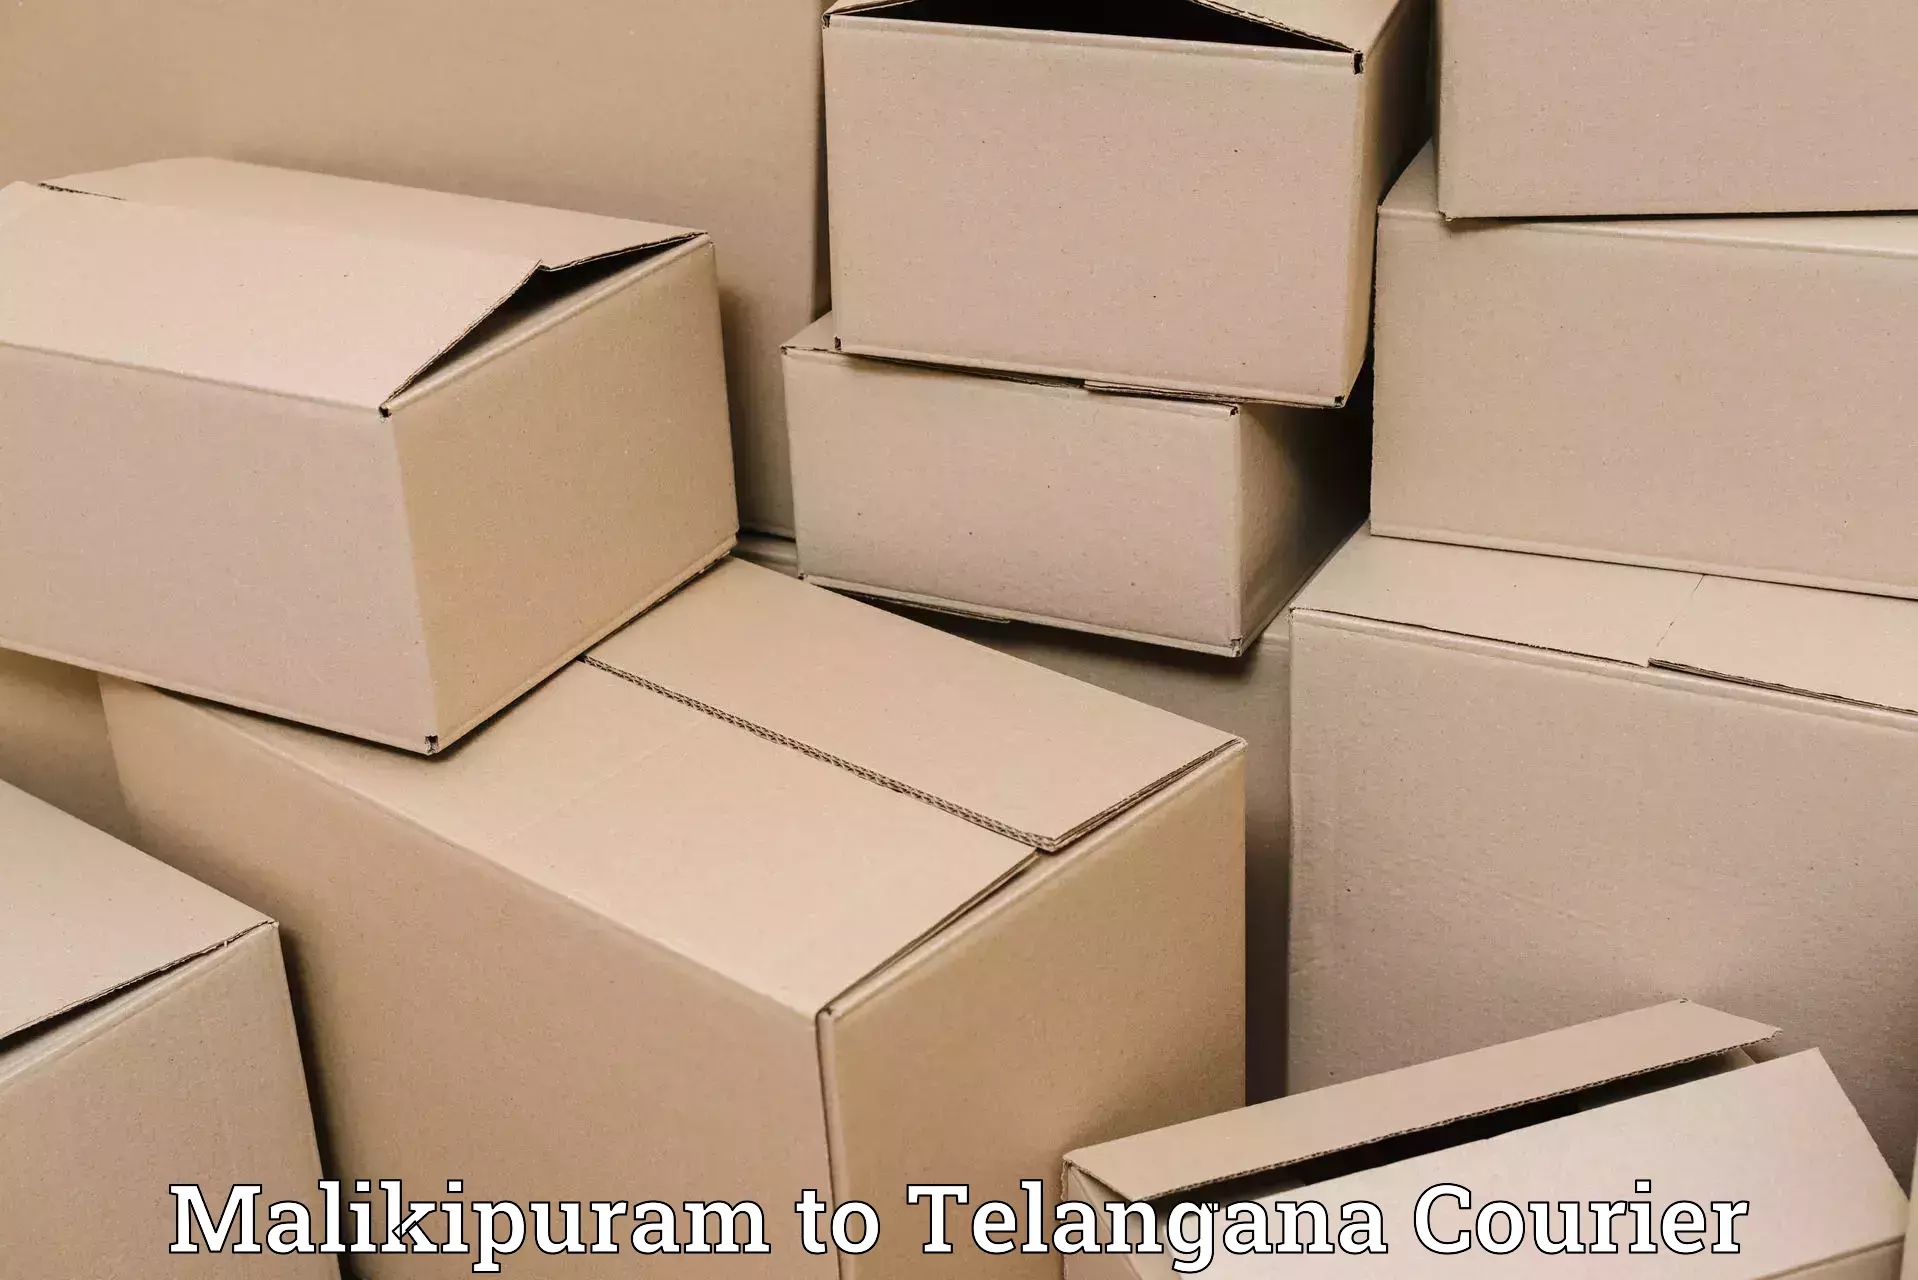 On-call courier service Malikipuram to Sultanabad